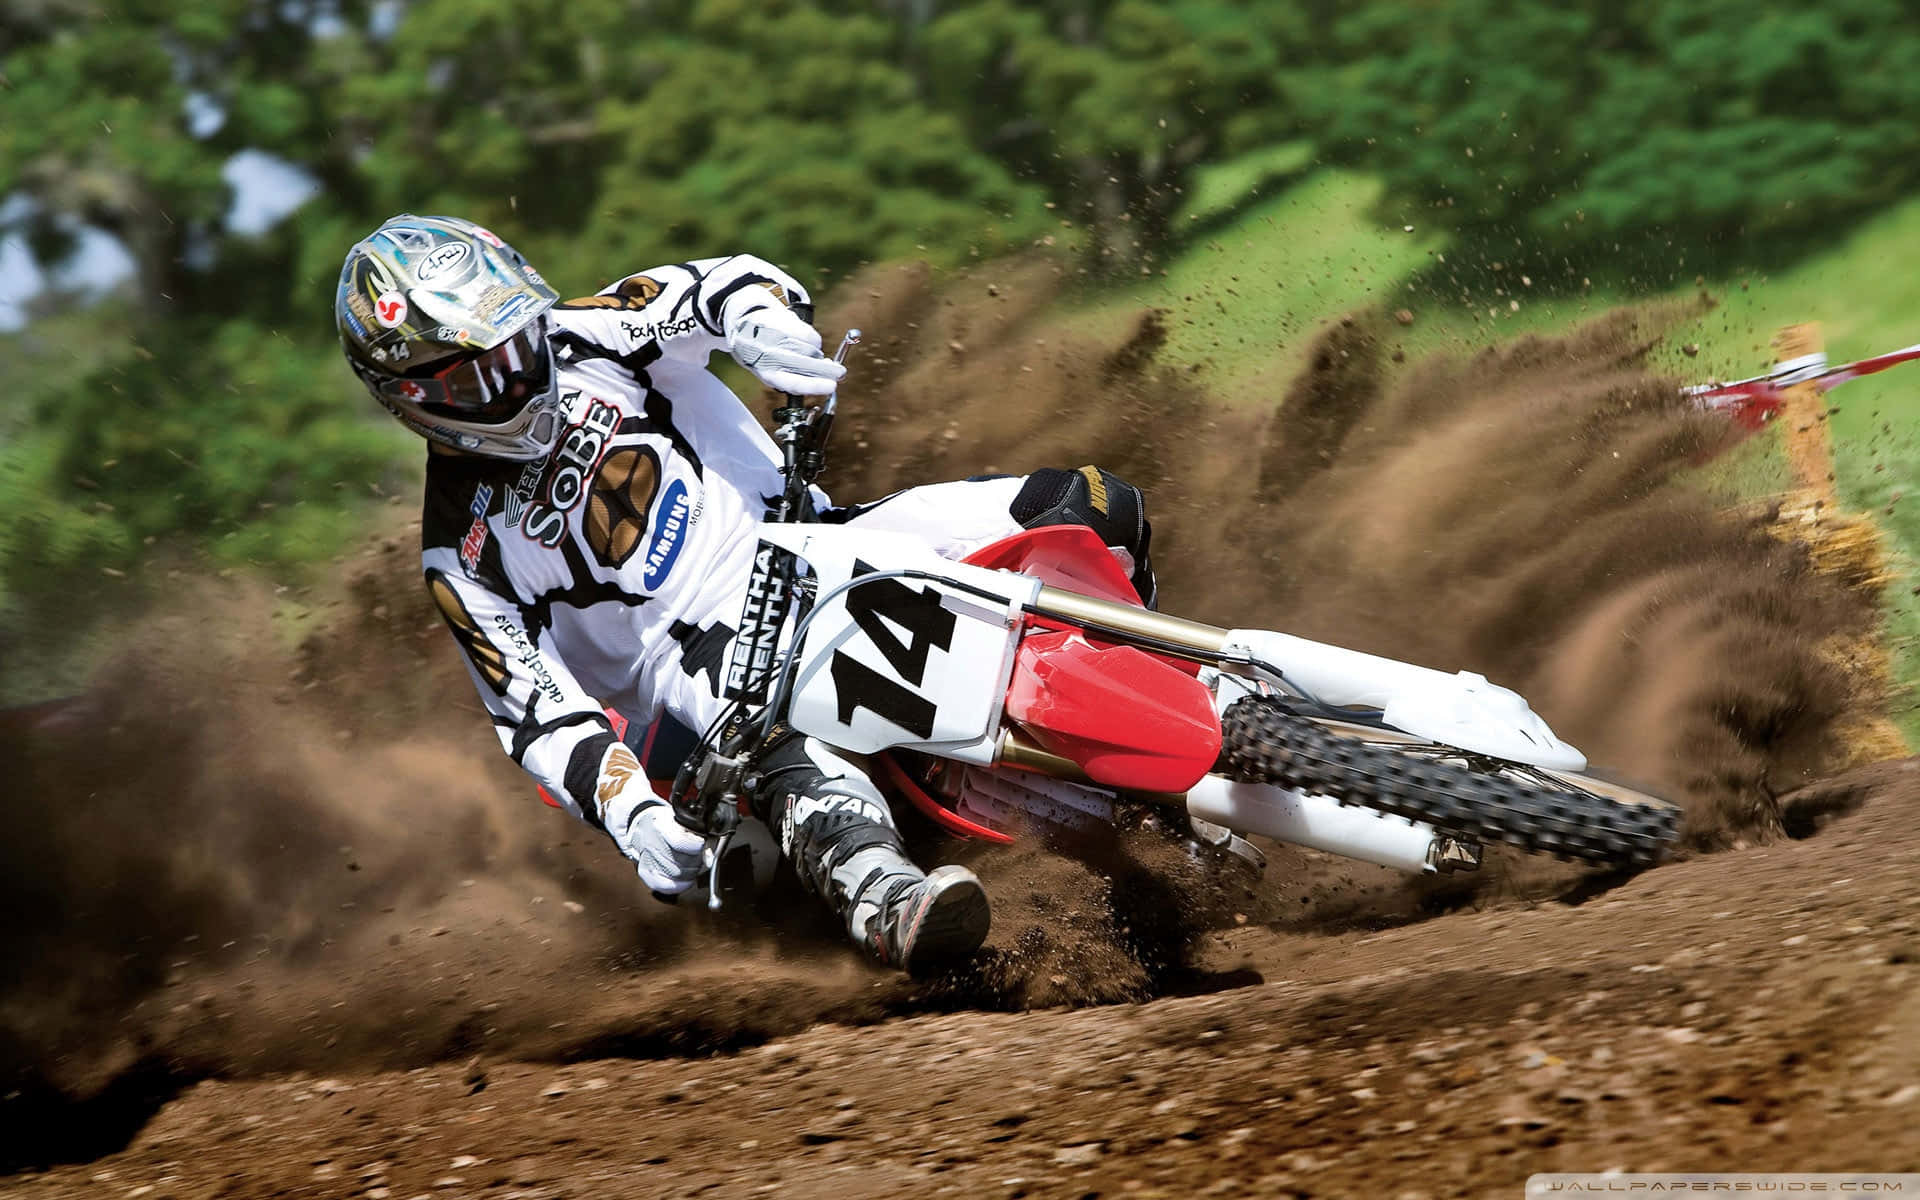 A Dirt Bike Rider Is Riding His Bike On A Dirt Track Wallpaper